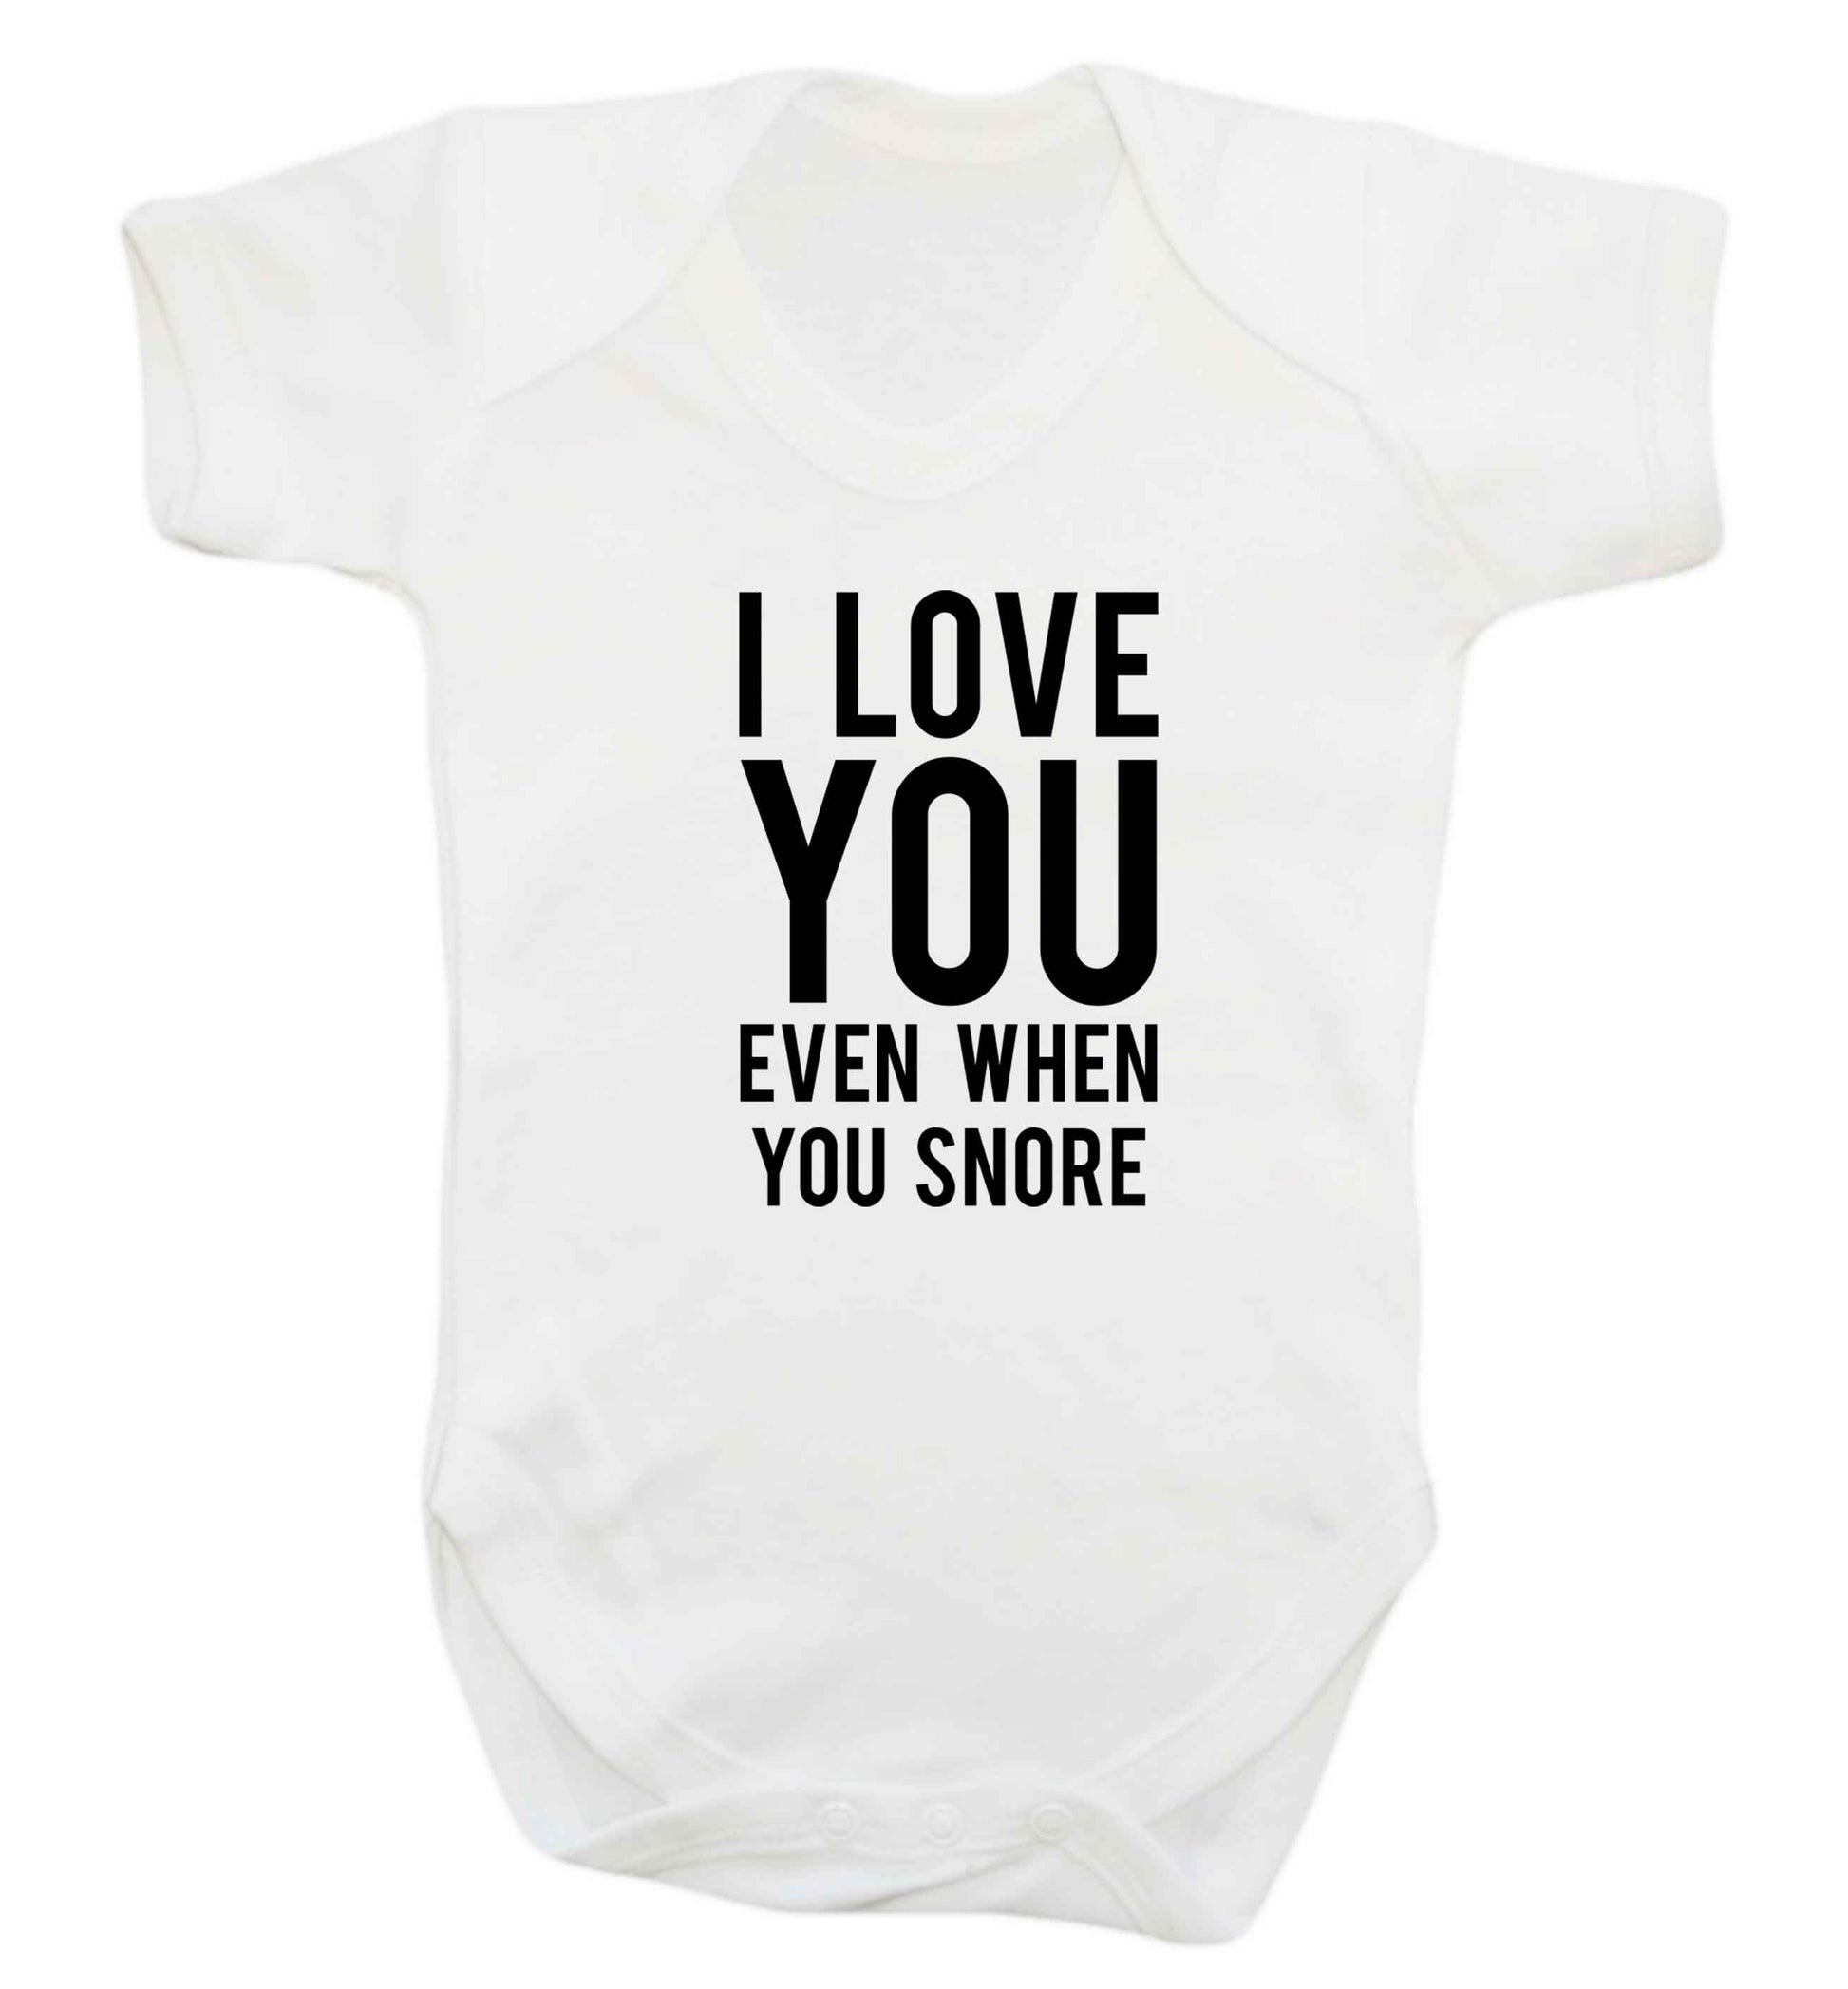 I love you even when you snore baby vest white 18-24 months